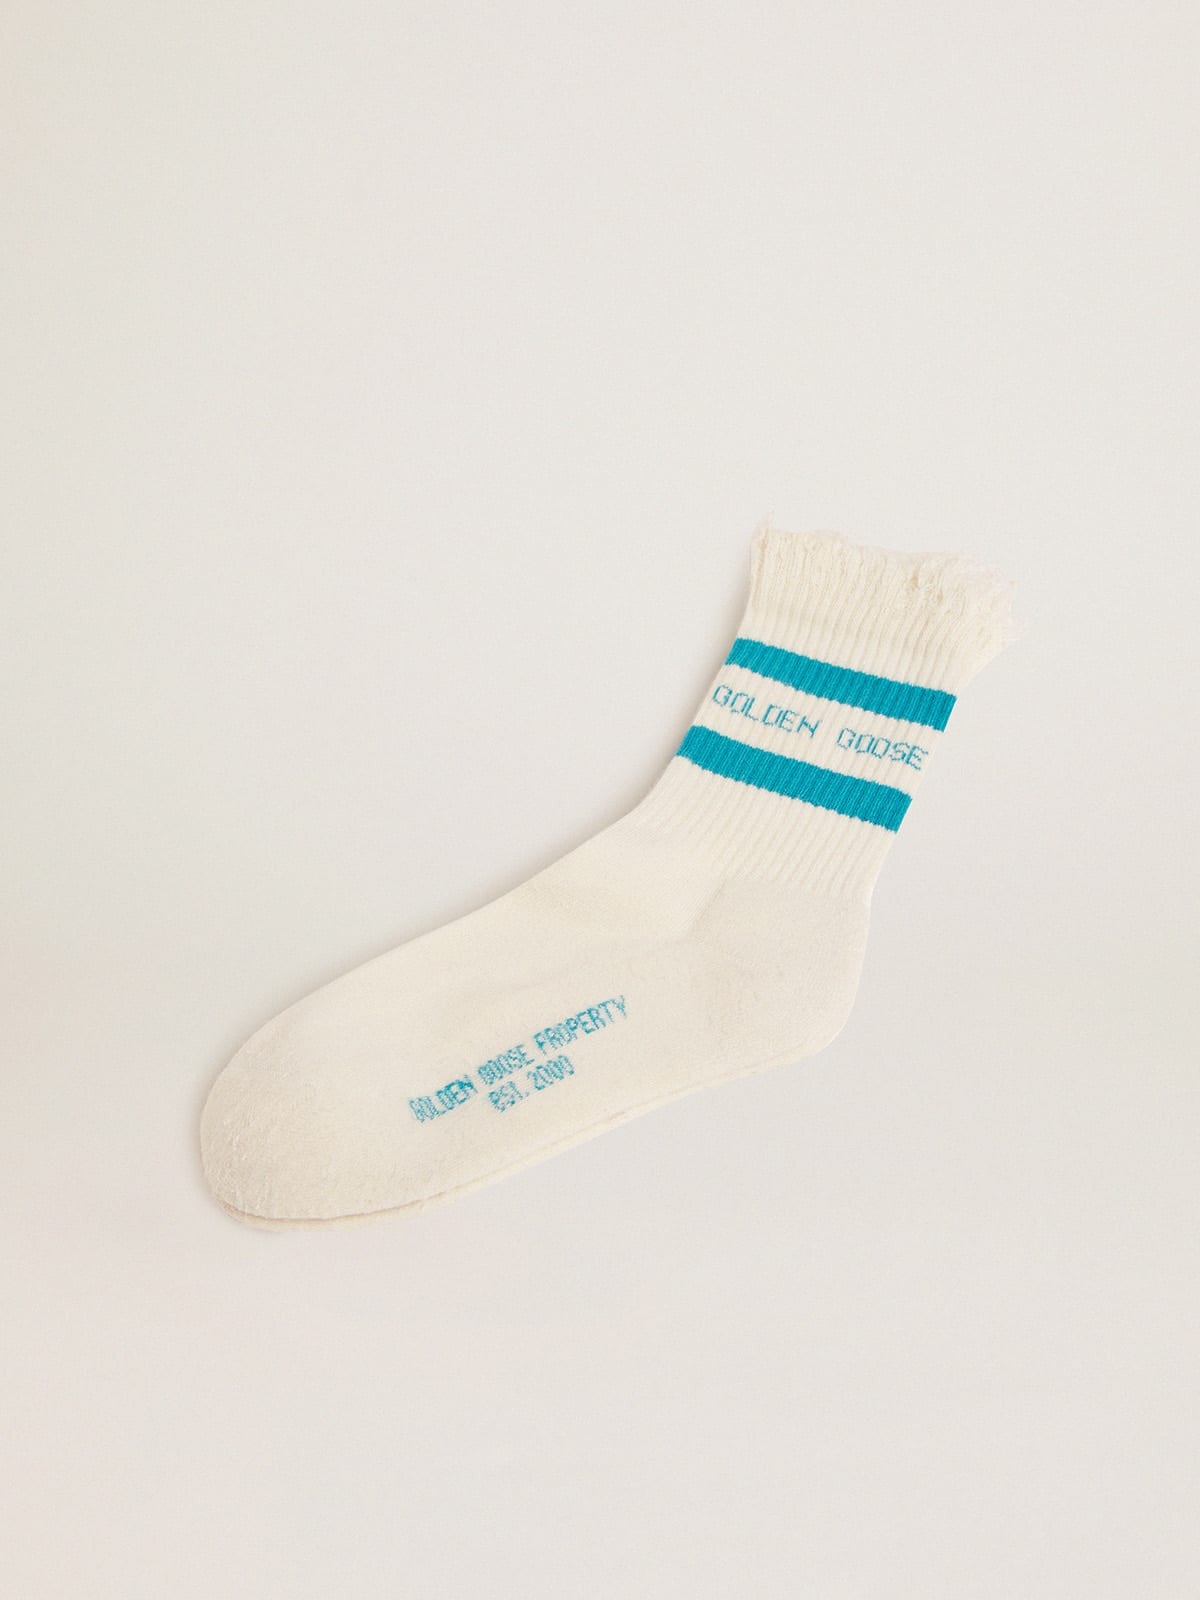 Distressed-finish white socks with turquoise logo and stripes - 1